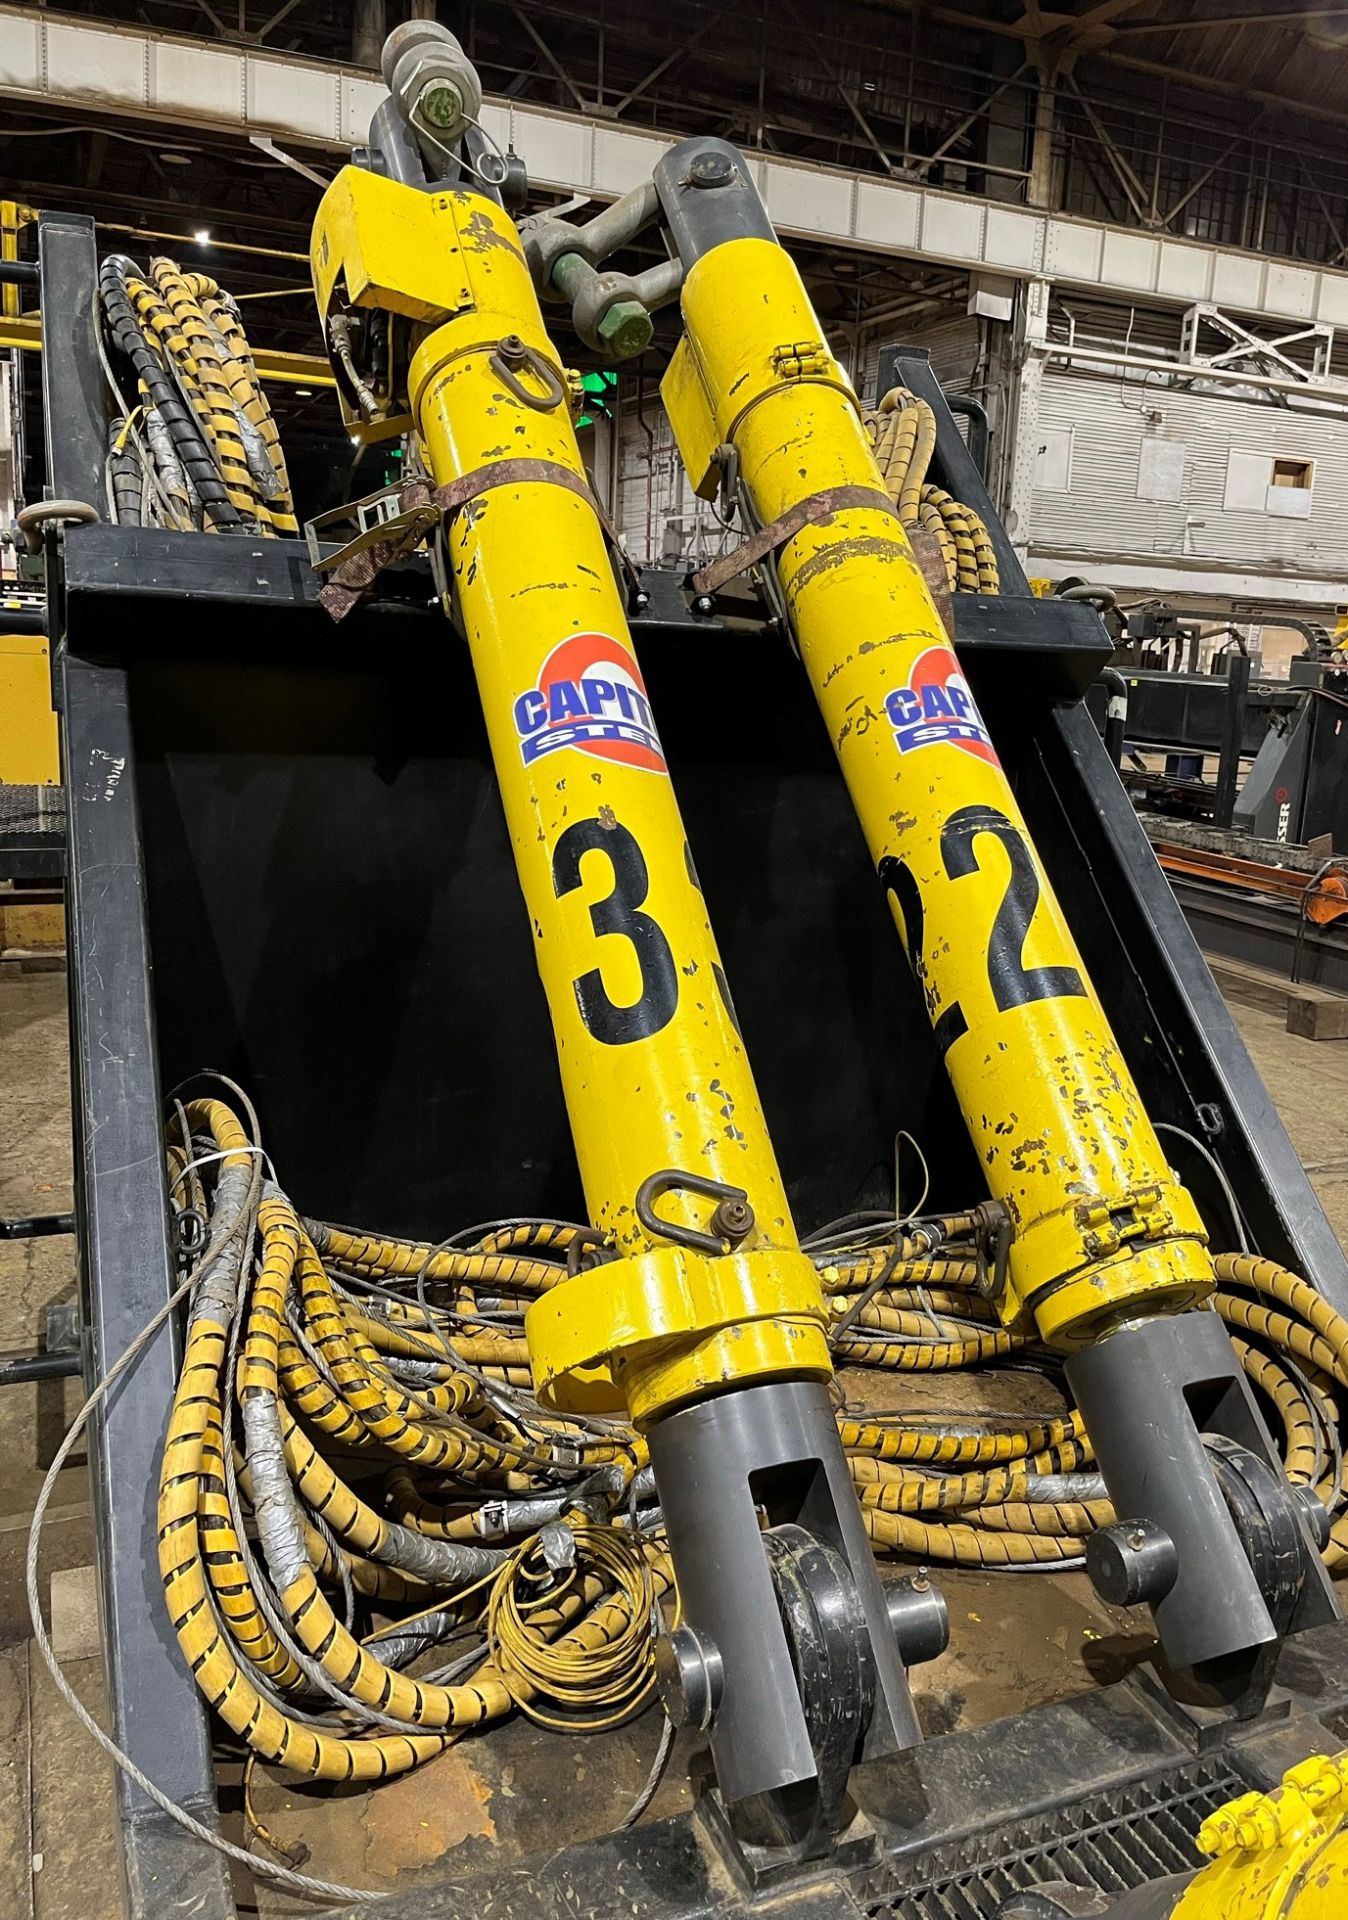 ENERPAC SYNCHRONOUS HOIST SYSTEM WITH STORAGE/SHIPPING CADDY; (4) 100 TON CAPACITY CYLINDERS - Image 22 of 46